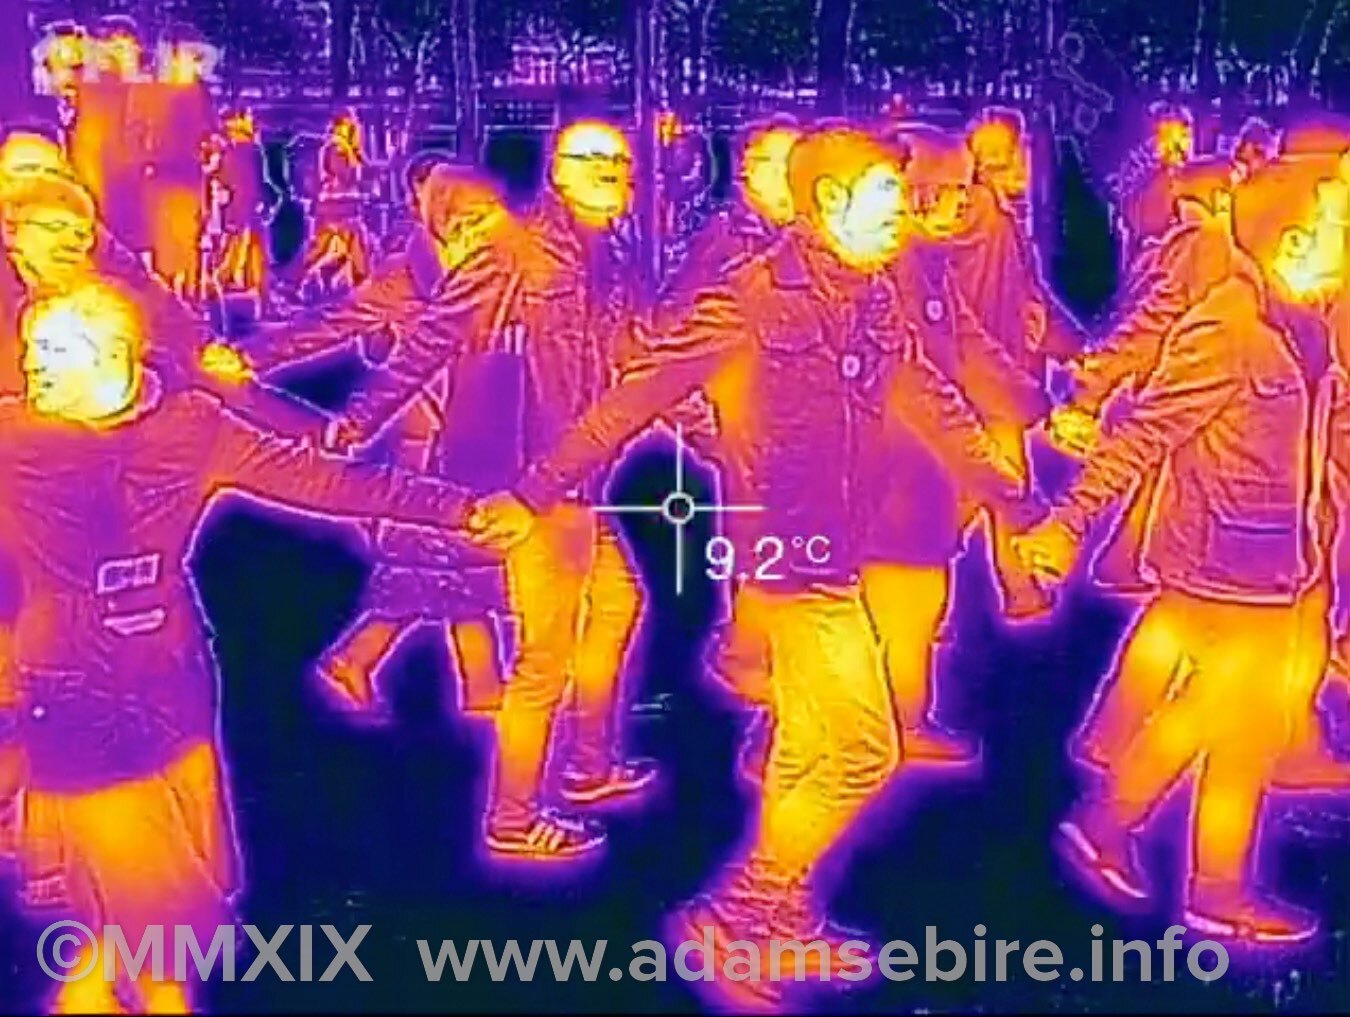 Climate change COP21 protests thermal image.jpg